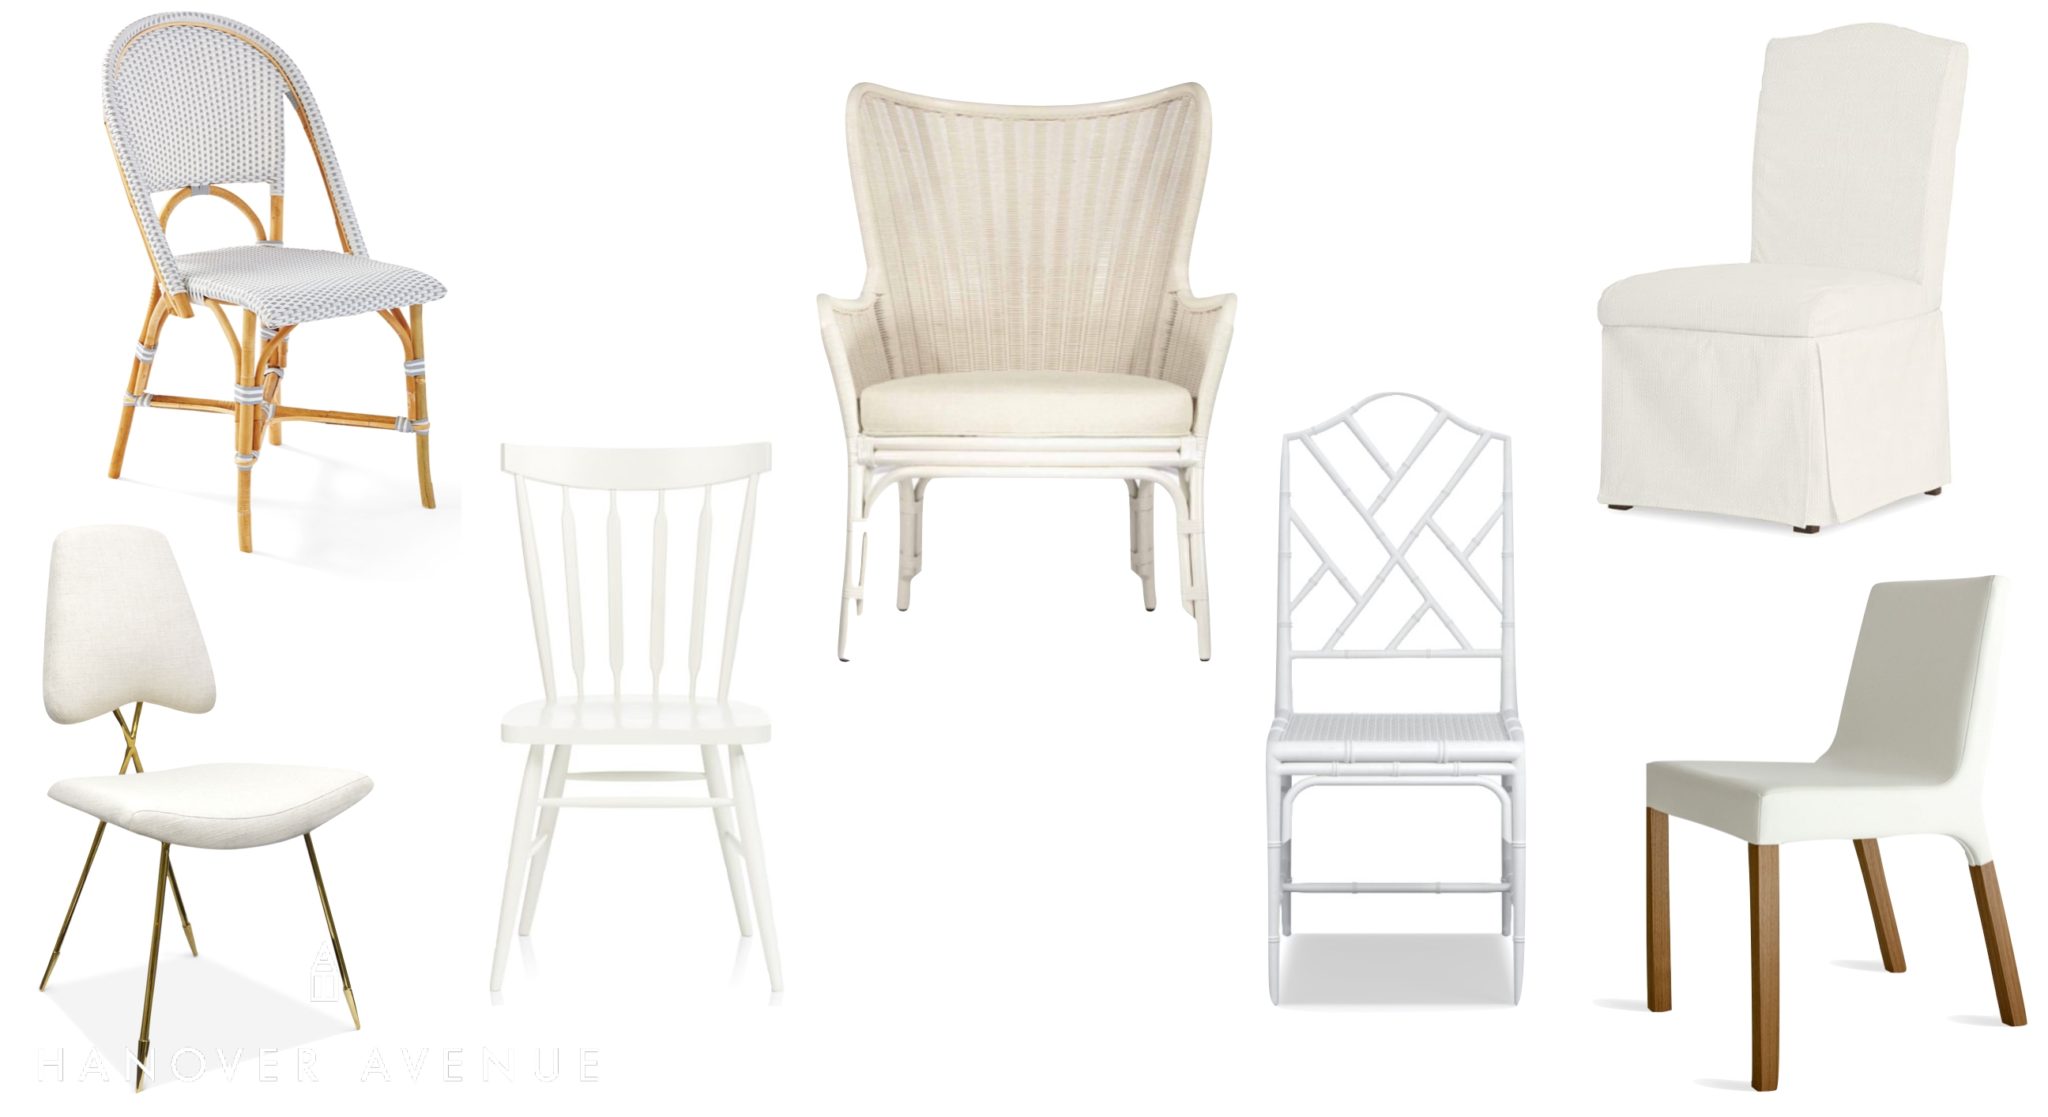 favorite, white, chairs, dining chair, side chair, arm chair